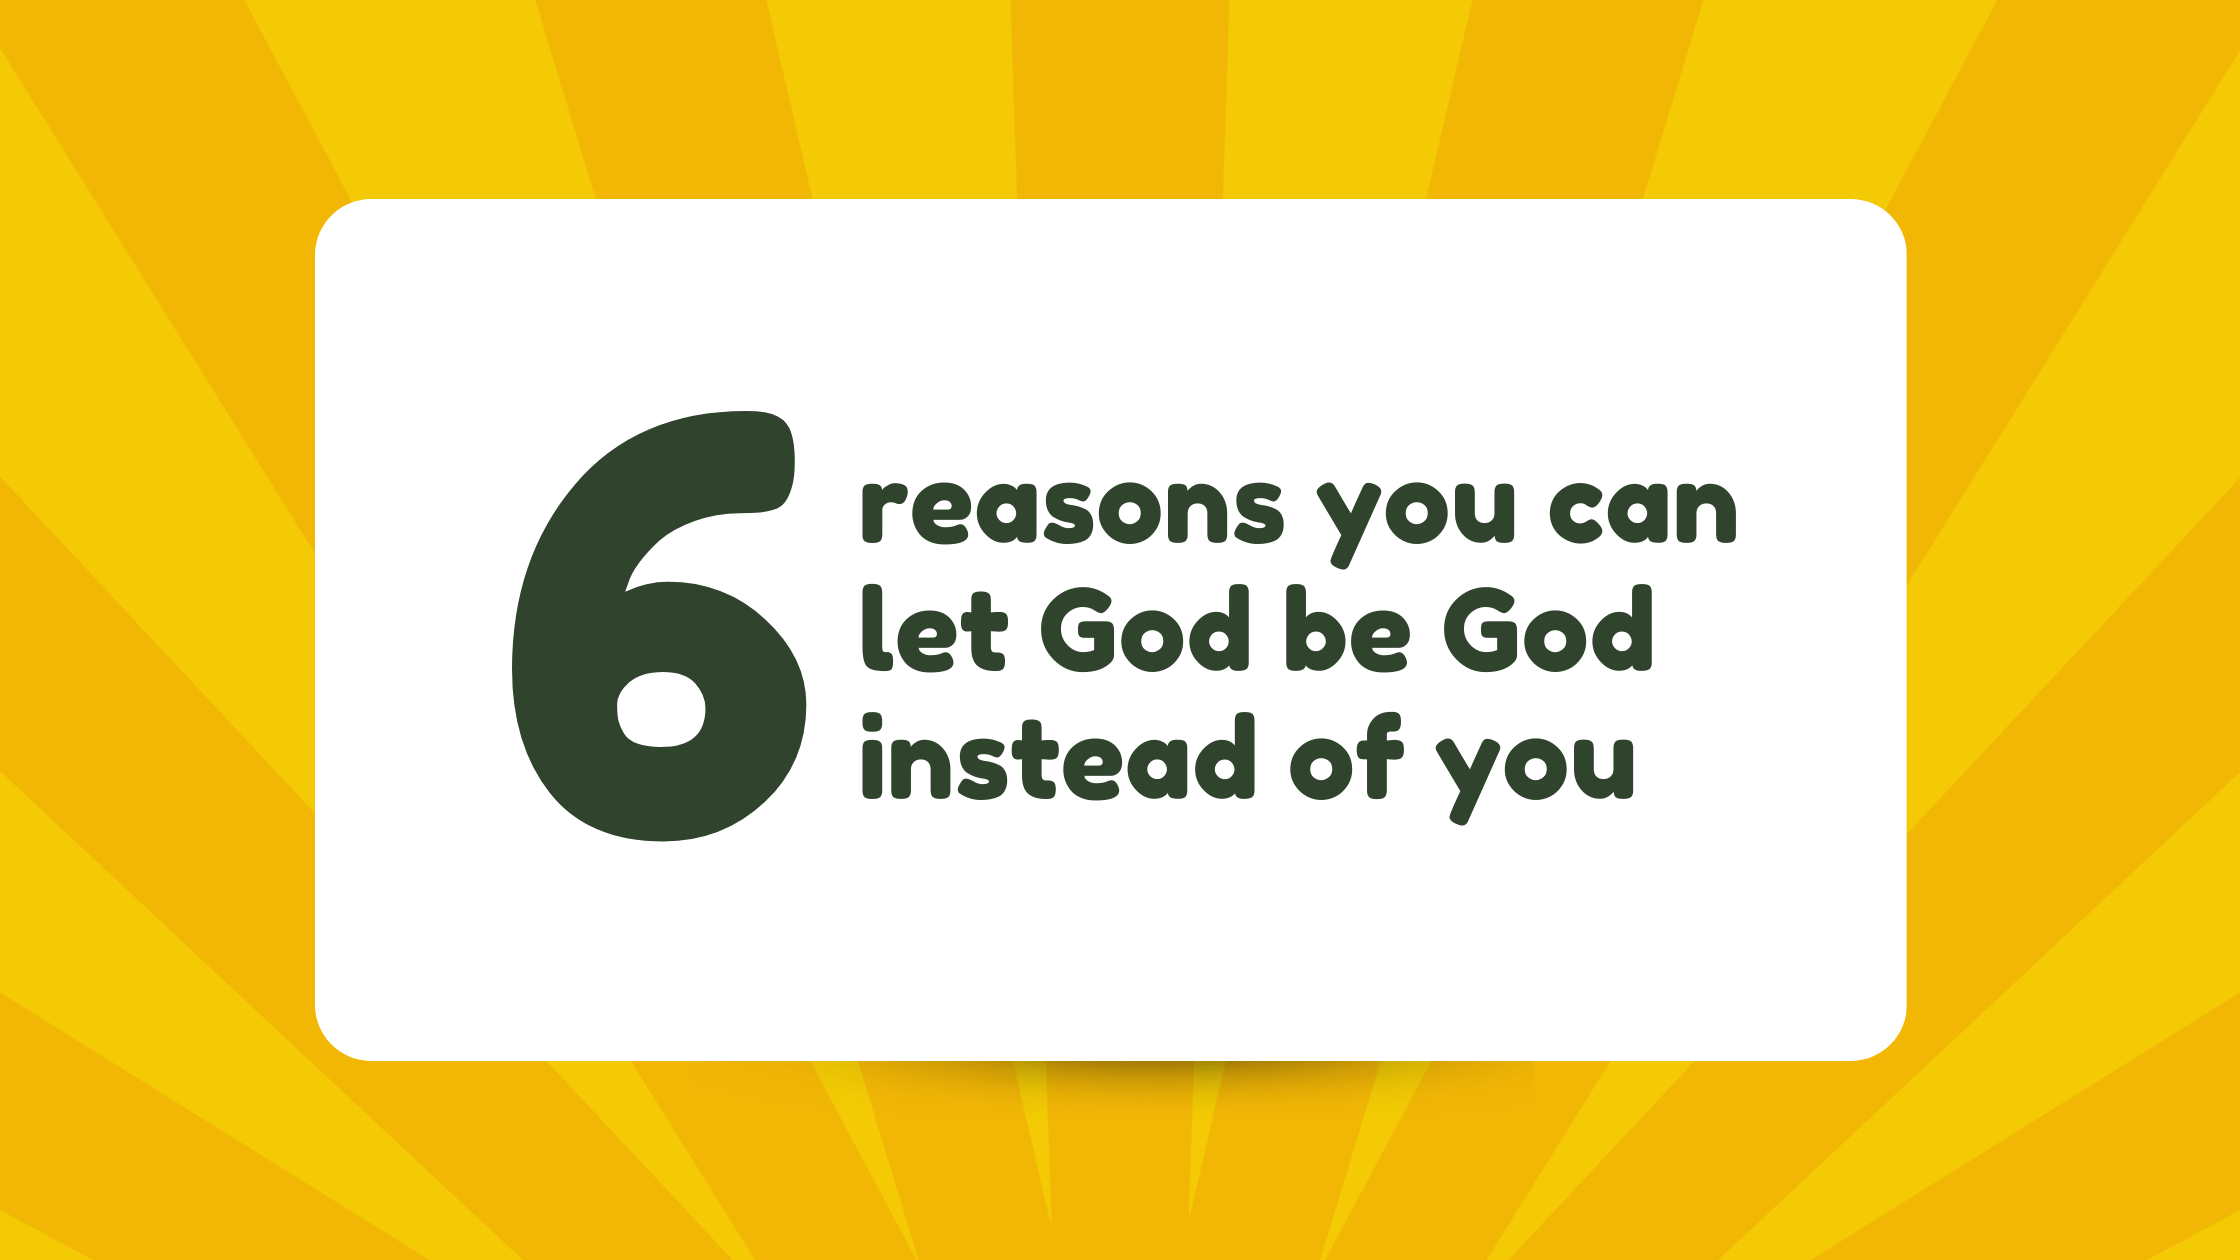 6 reasons you can let God be God instead of you